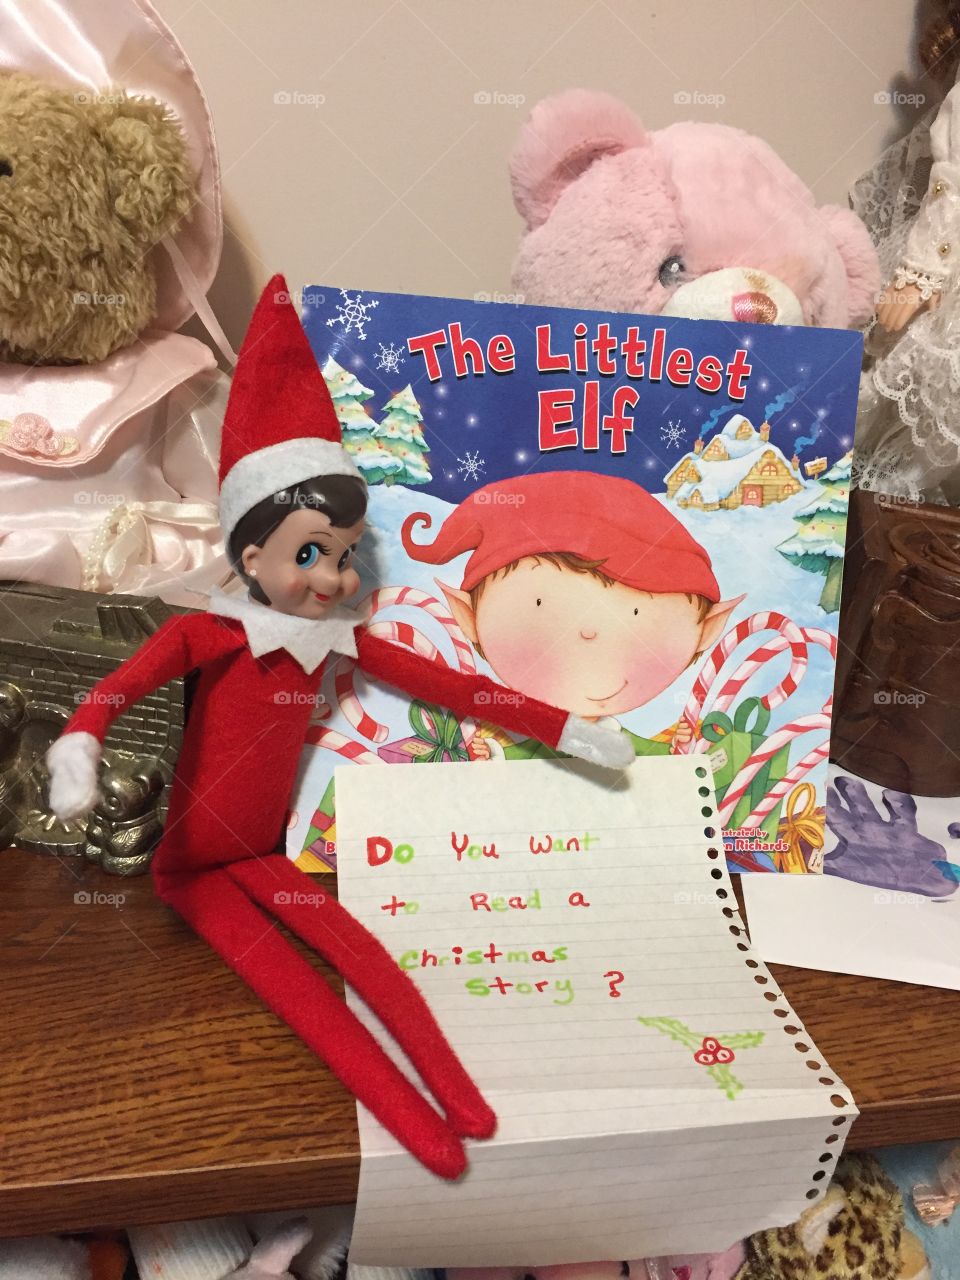 Elf wanting to read a story 